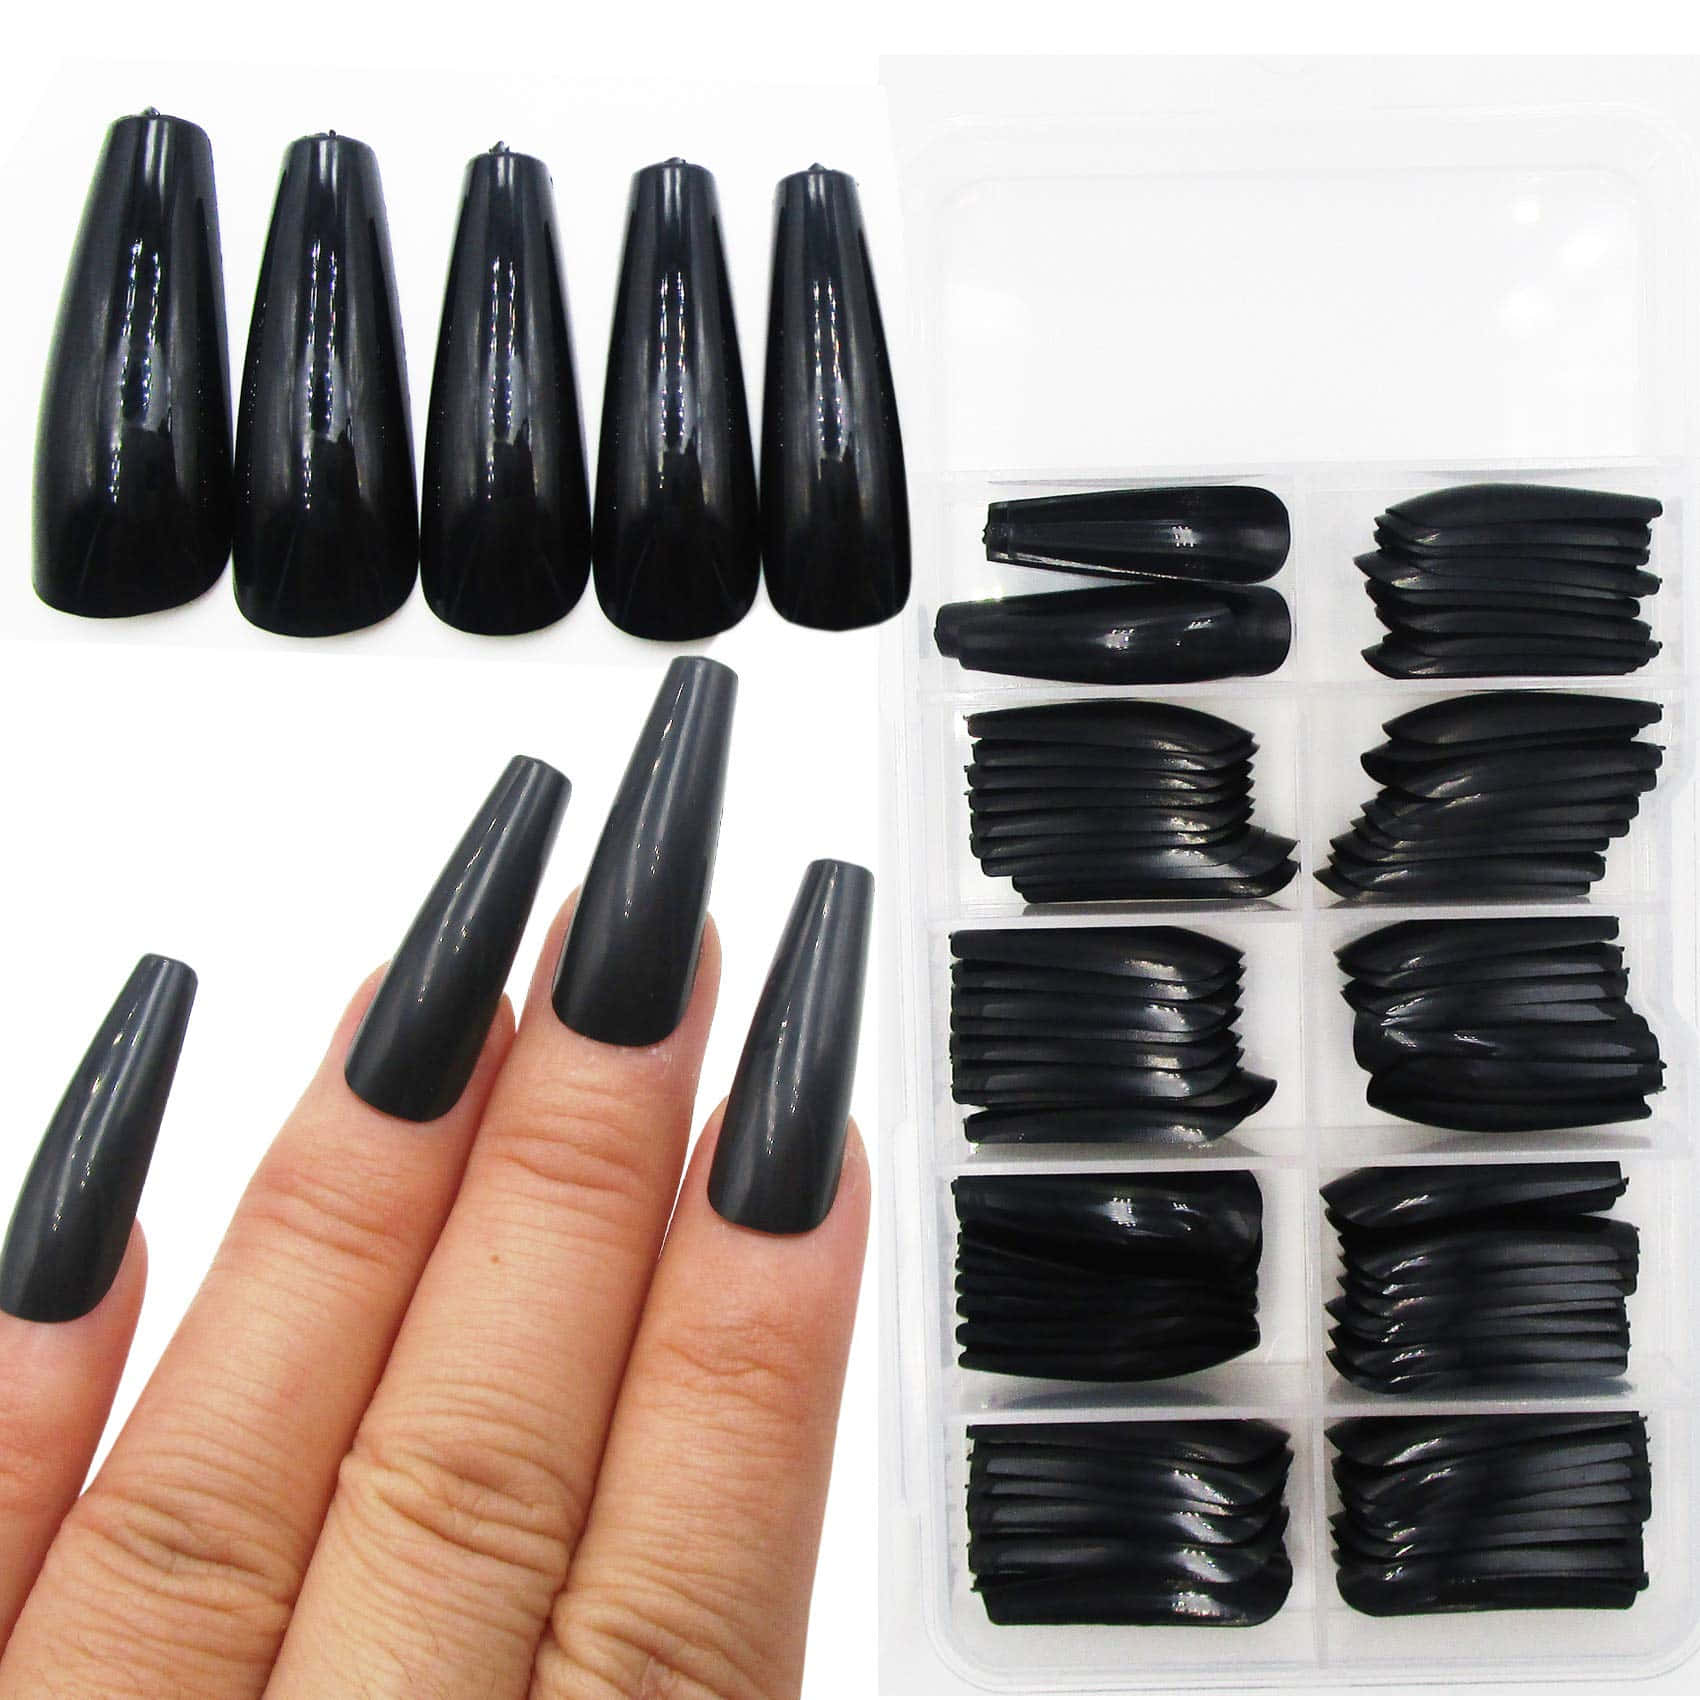 Download Black Acrylic Nails With Black Tips In A Box | Wallpapers.com